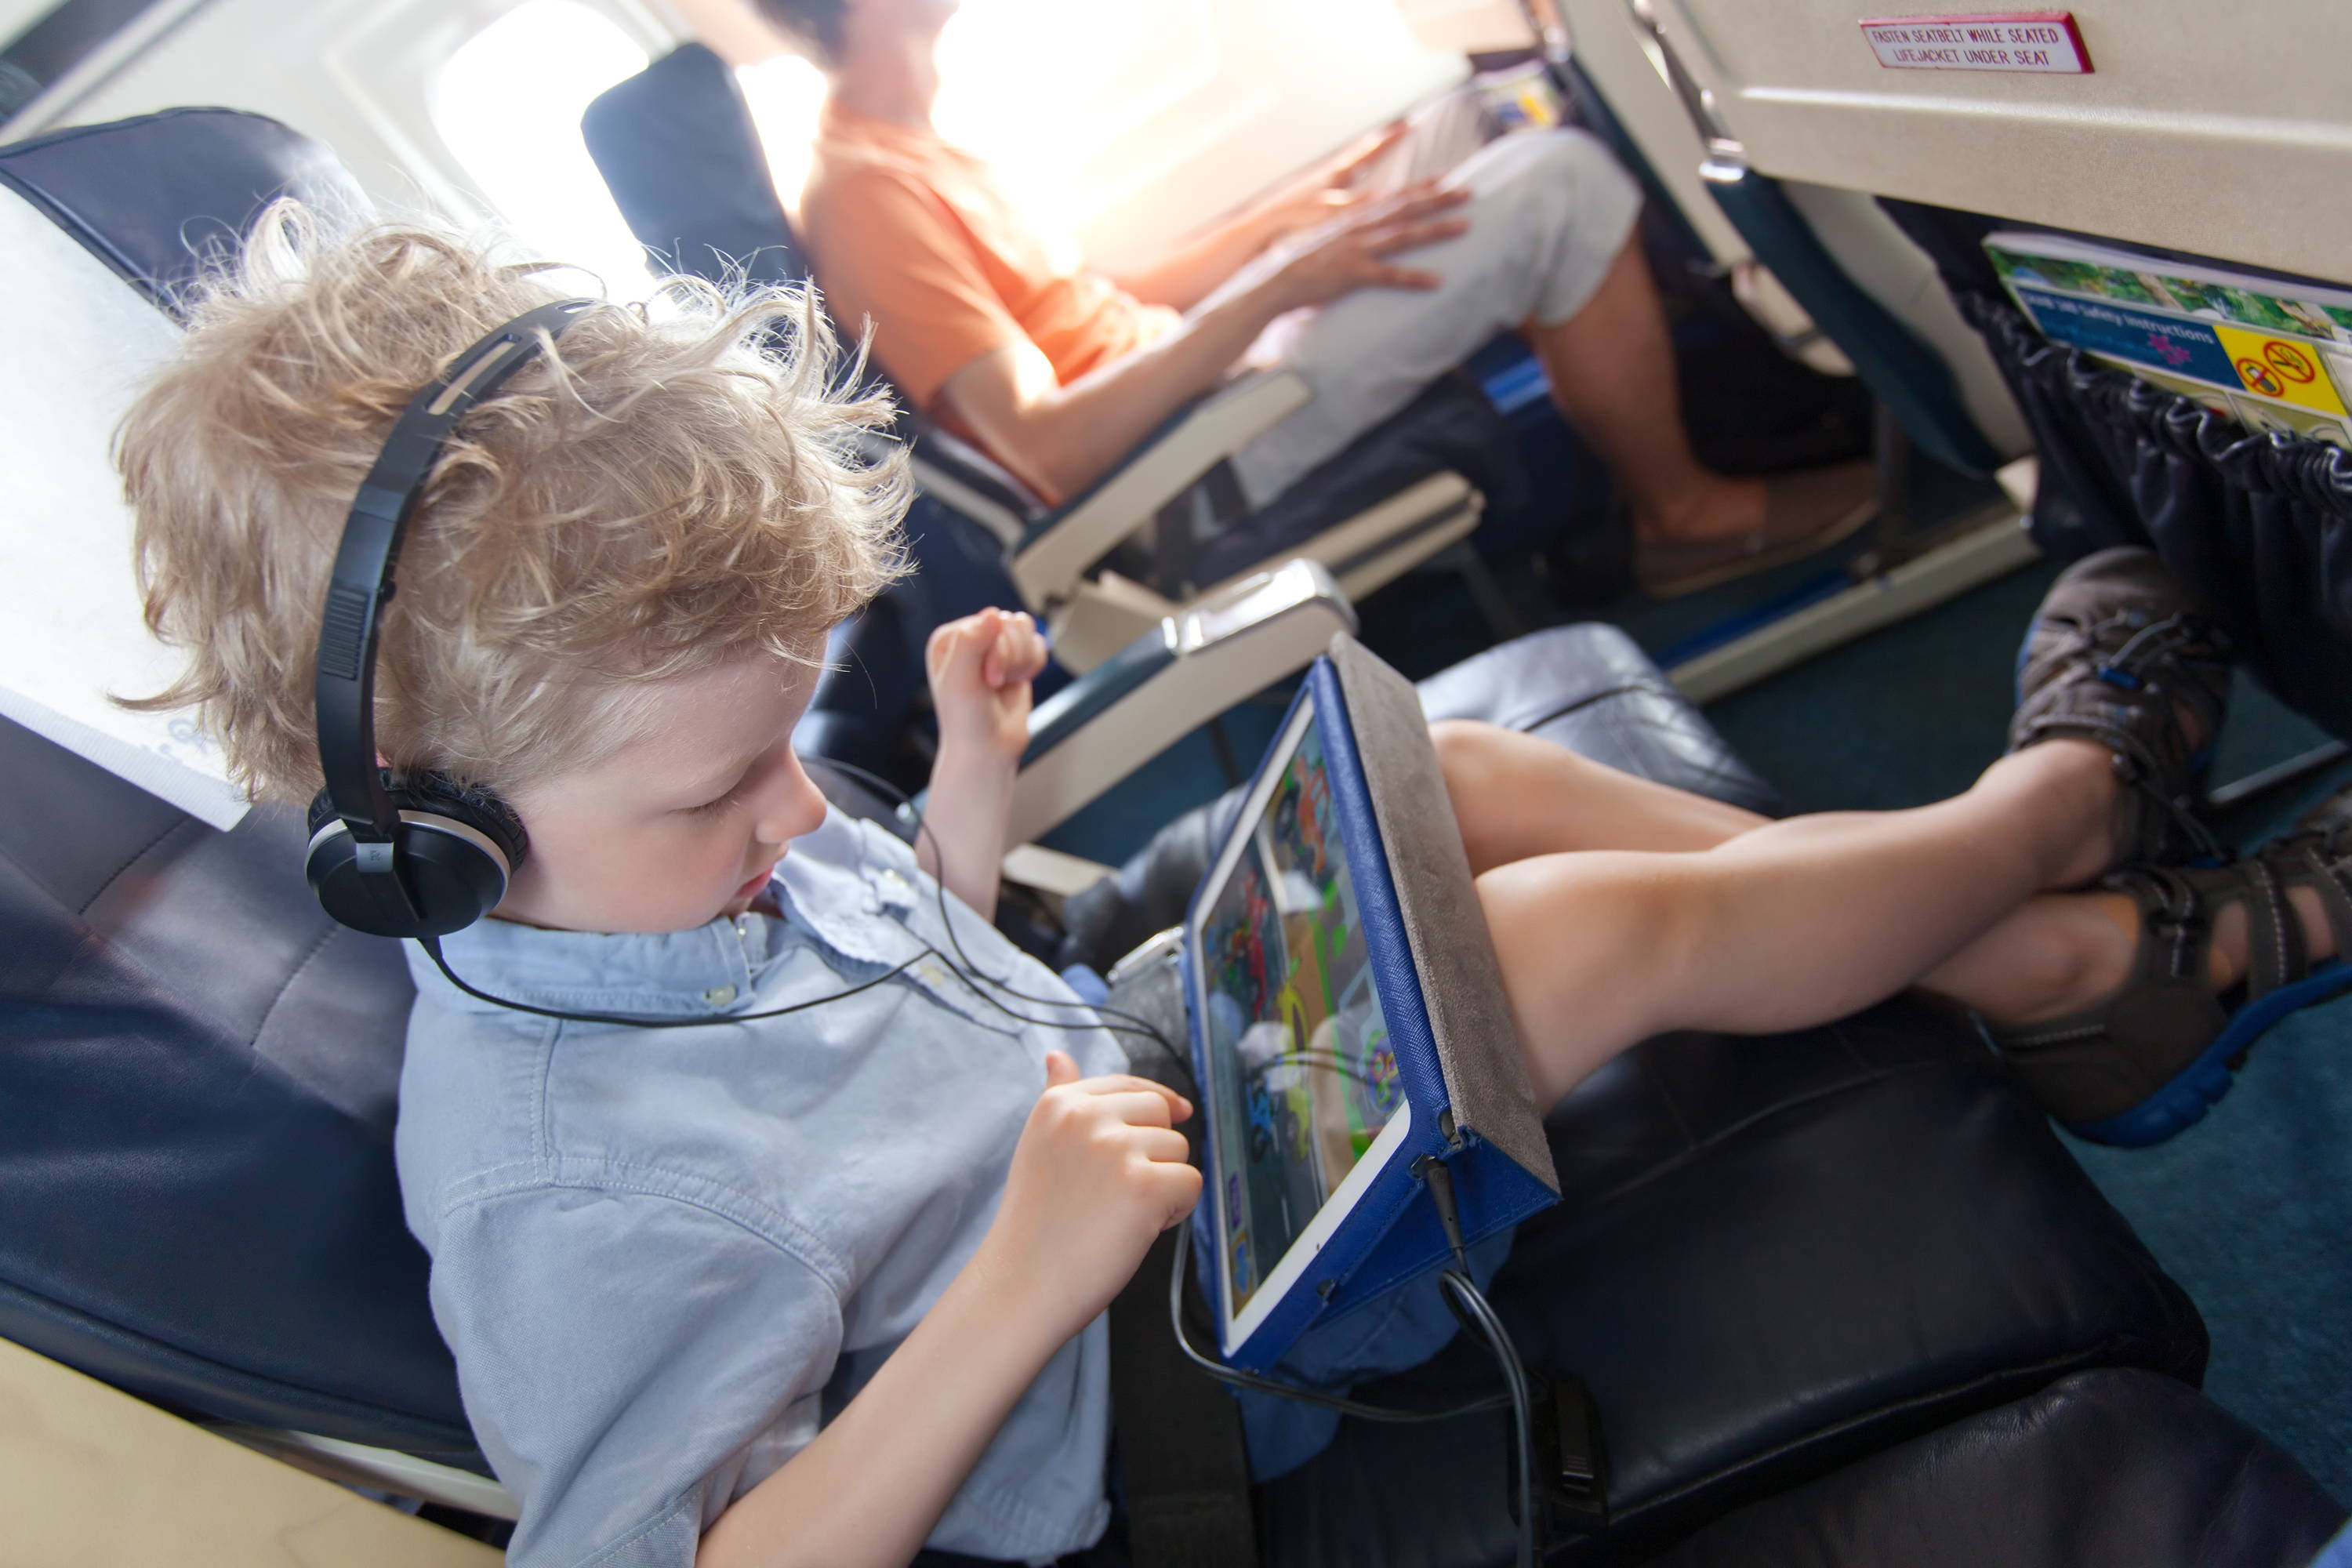 kid playing on an electronic device while on the plane